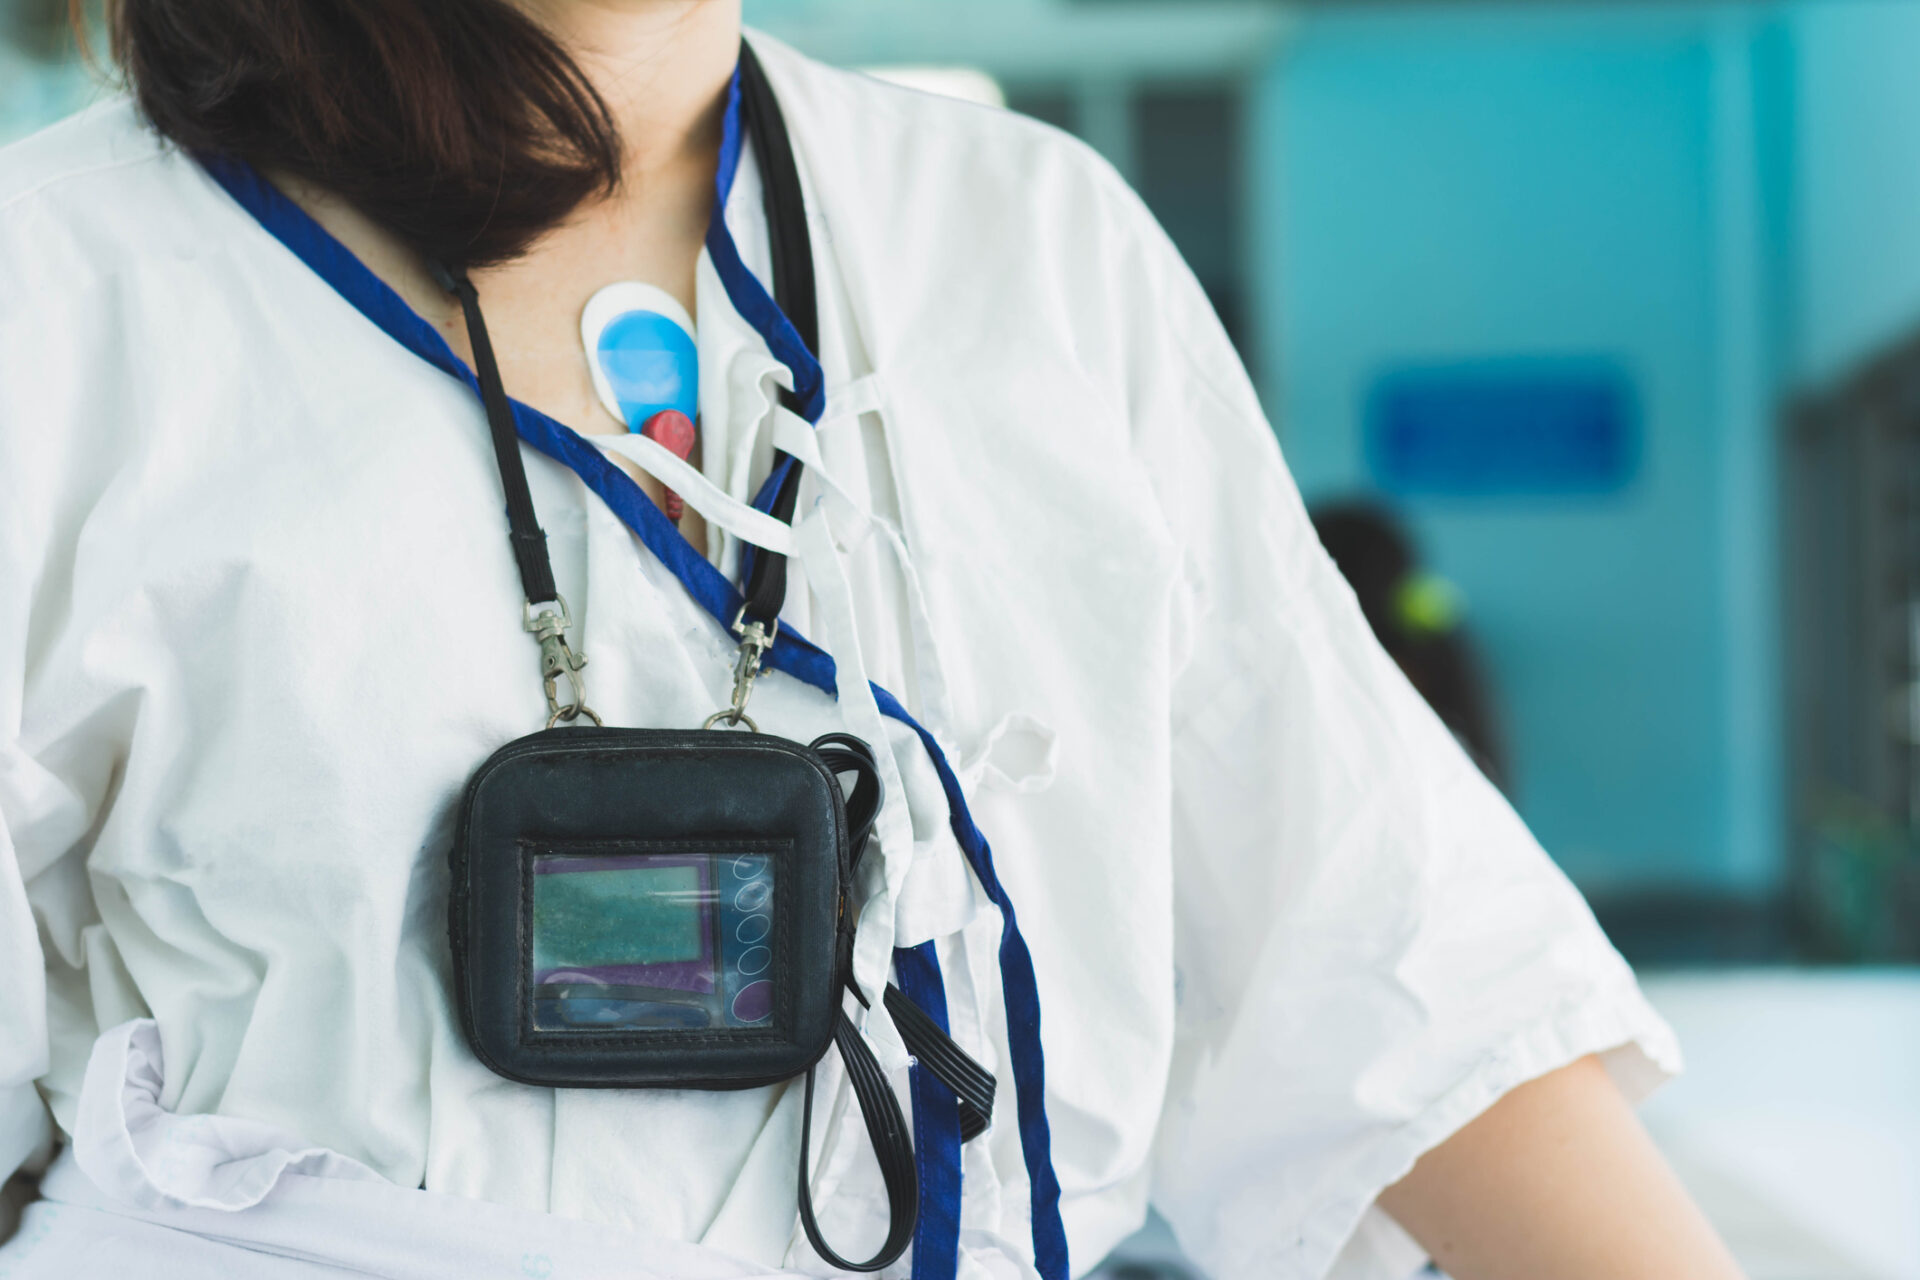 Cardiac Monitoring Devices Market Latest Trends and Analysis, Future Growth Study by 2032